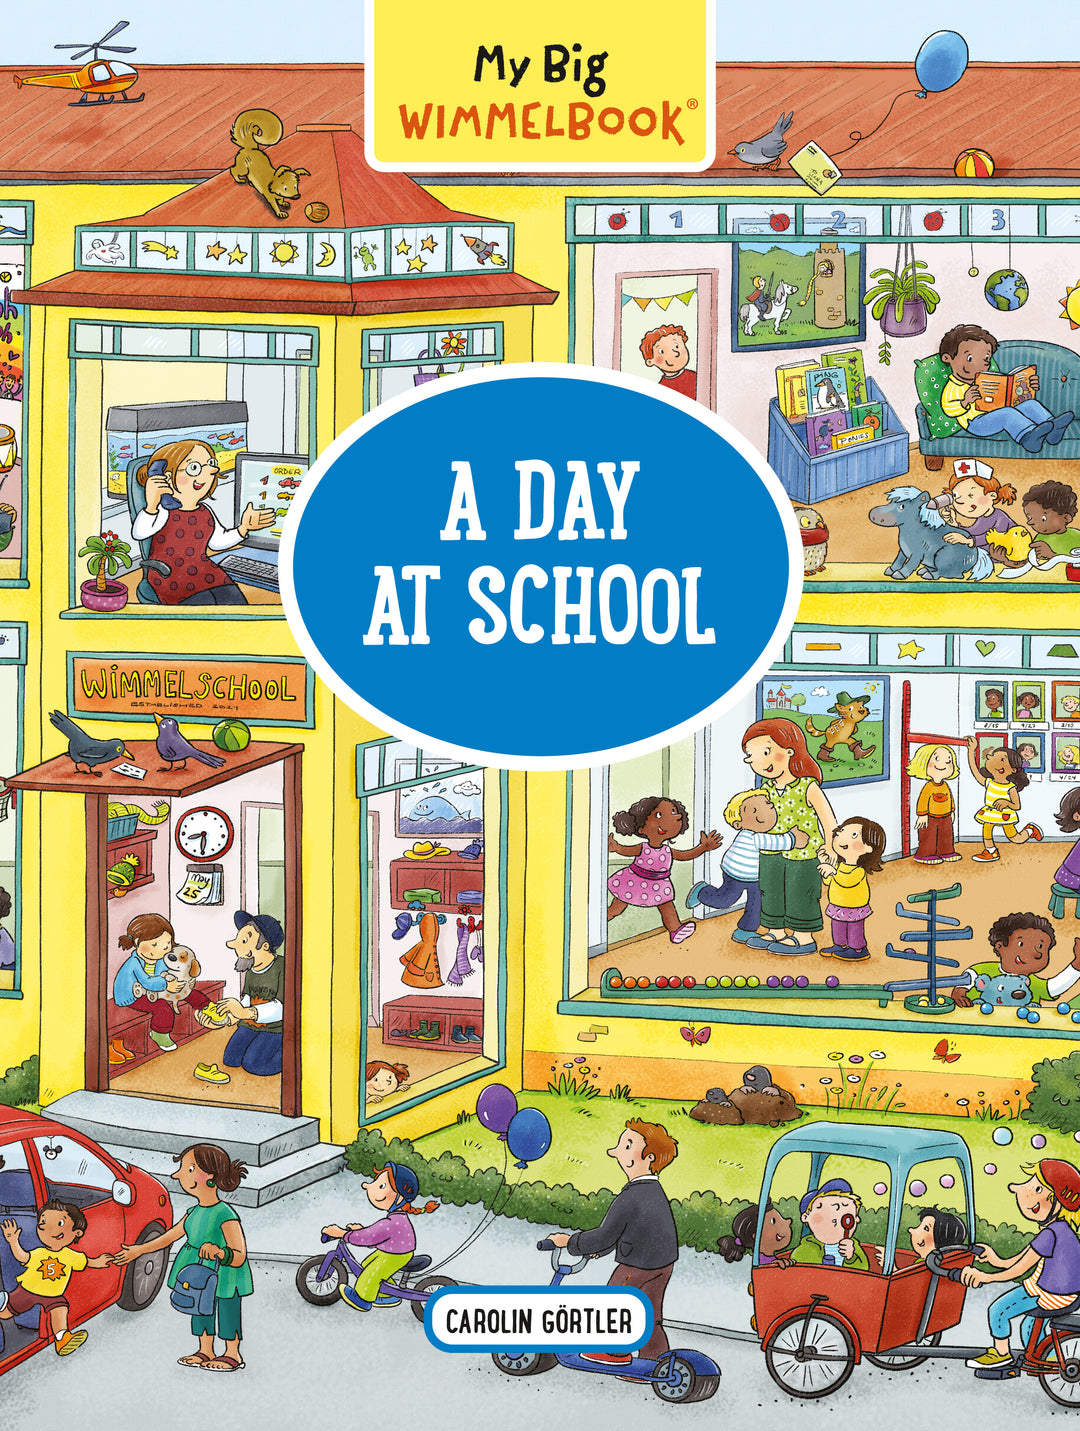 My Big Wimmelbook - A Day at School